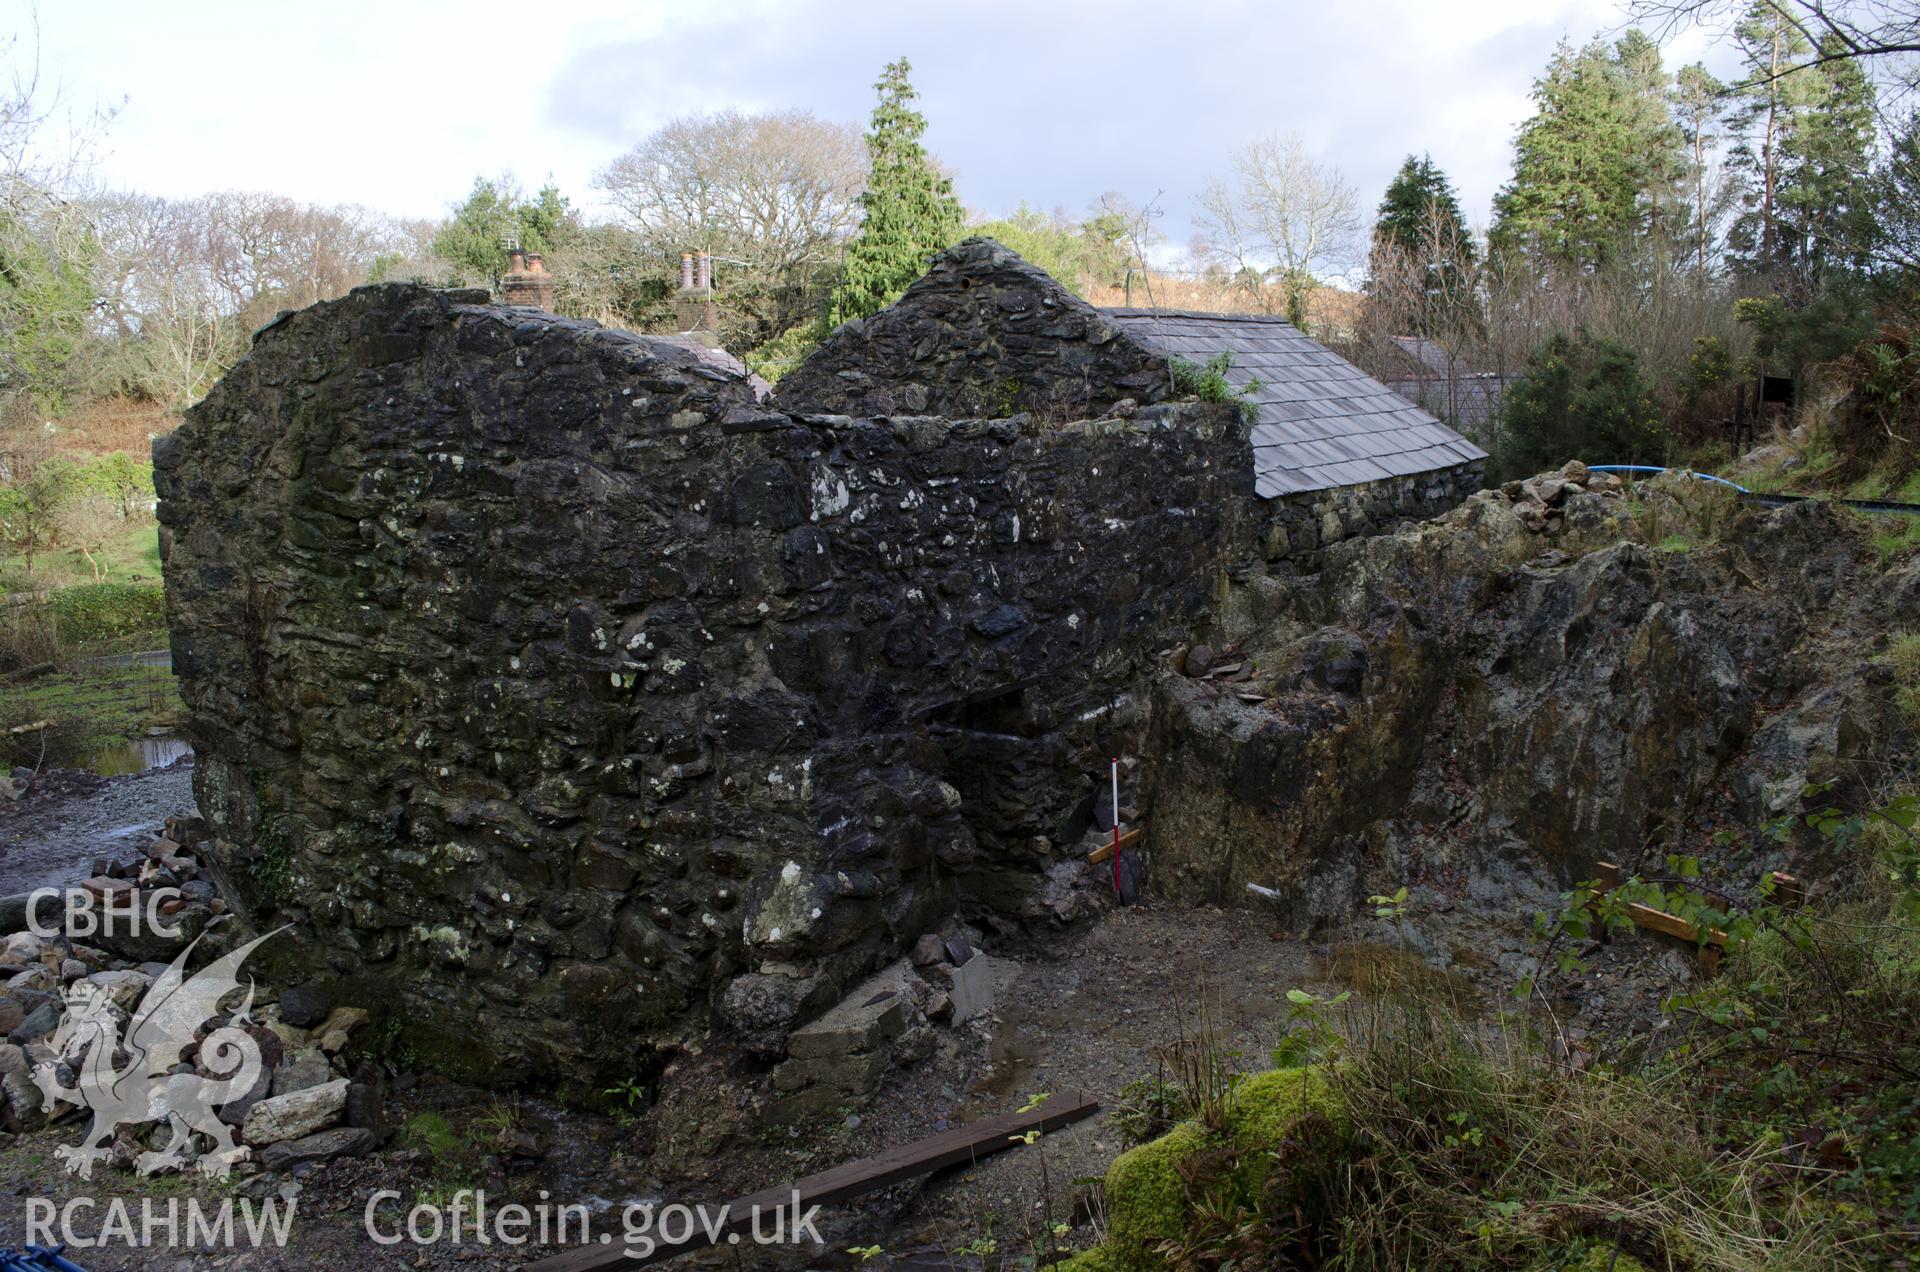 View from south showing general view, taken by Jessica Davidson, Gwynedd Archaeological Trust, 8th Jan 2016.